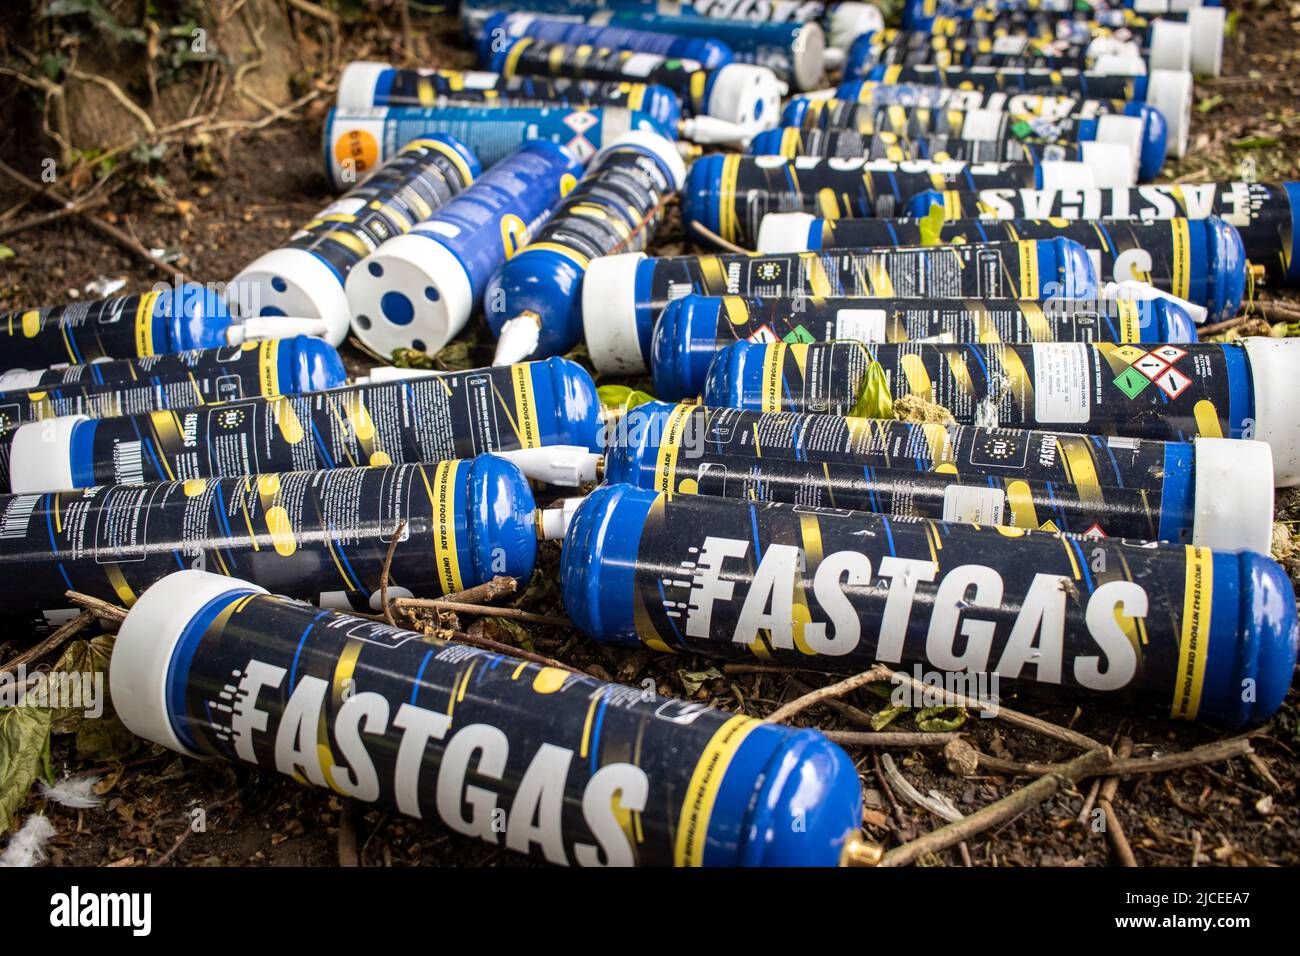 Cans of 'Fastgas' Nitrous Oxide (N2O) left discarded on a street in Bristol Stock Photo